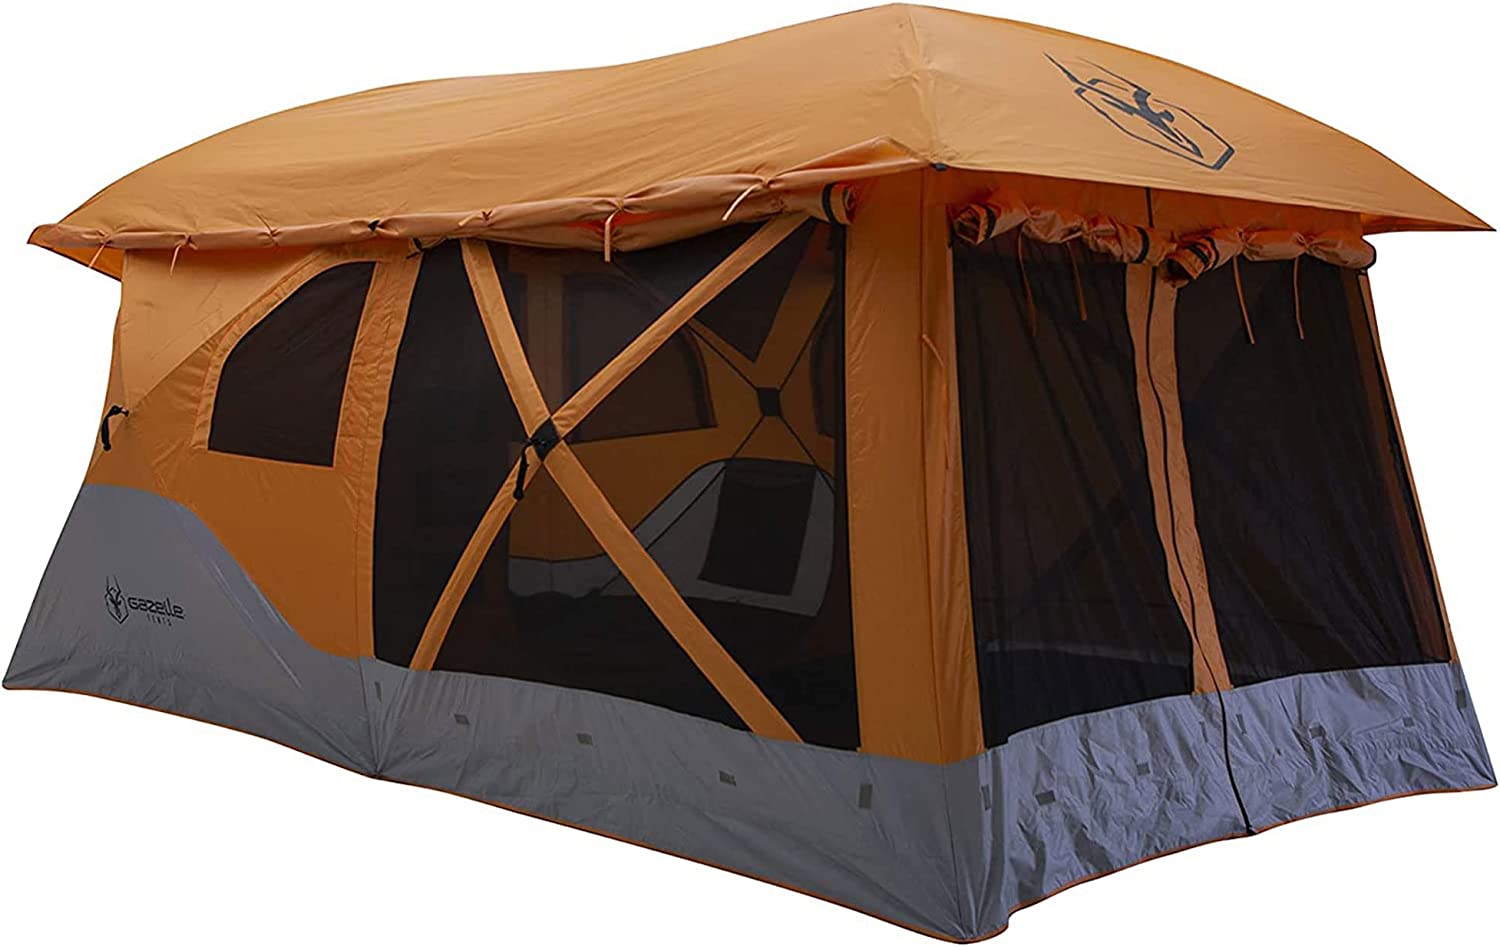 Gazelle Tents™, T4 Plus Hub Tent, Easy 90 Second Set-Up, Waterproof, UV Resistant, Convertible Screen Room, Removable Floor, Ample Storage Options, 4-8 Person, Sunset Orange, 78" x 94" x 165", GT450SS